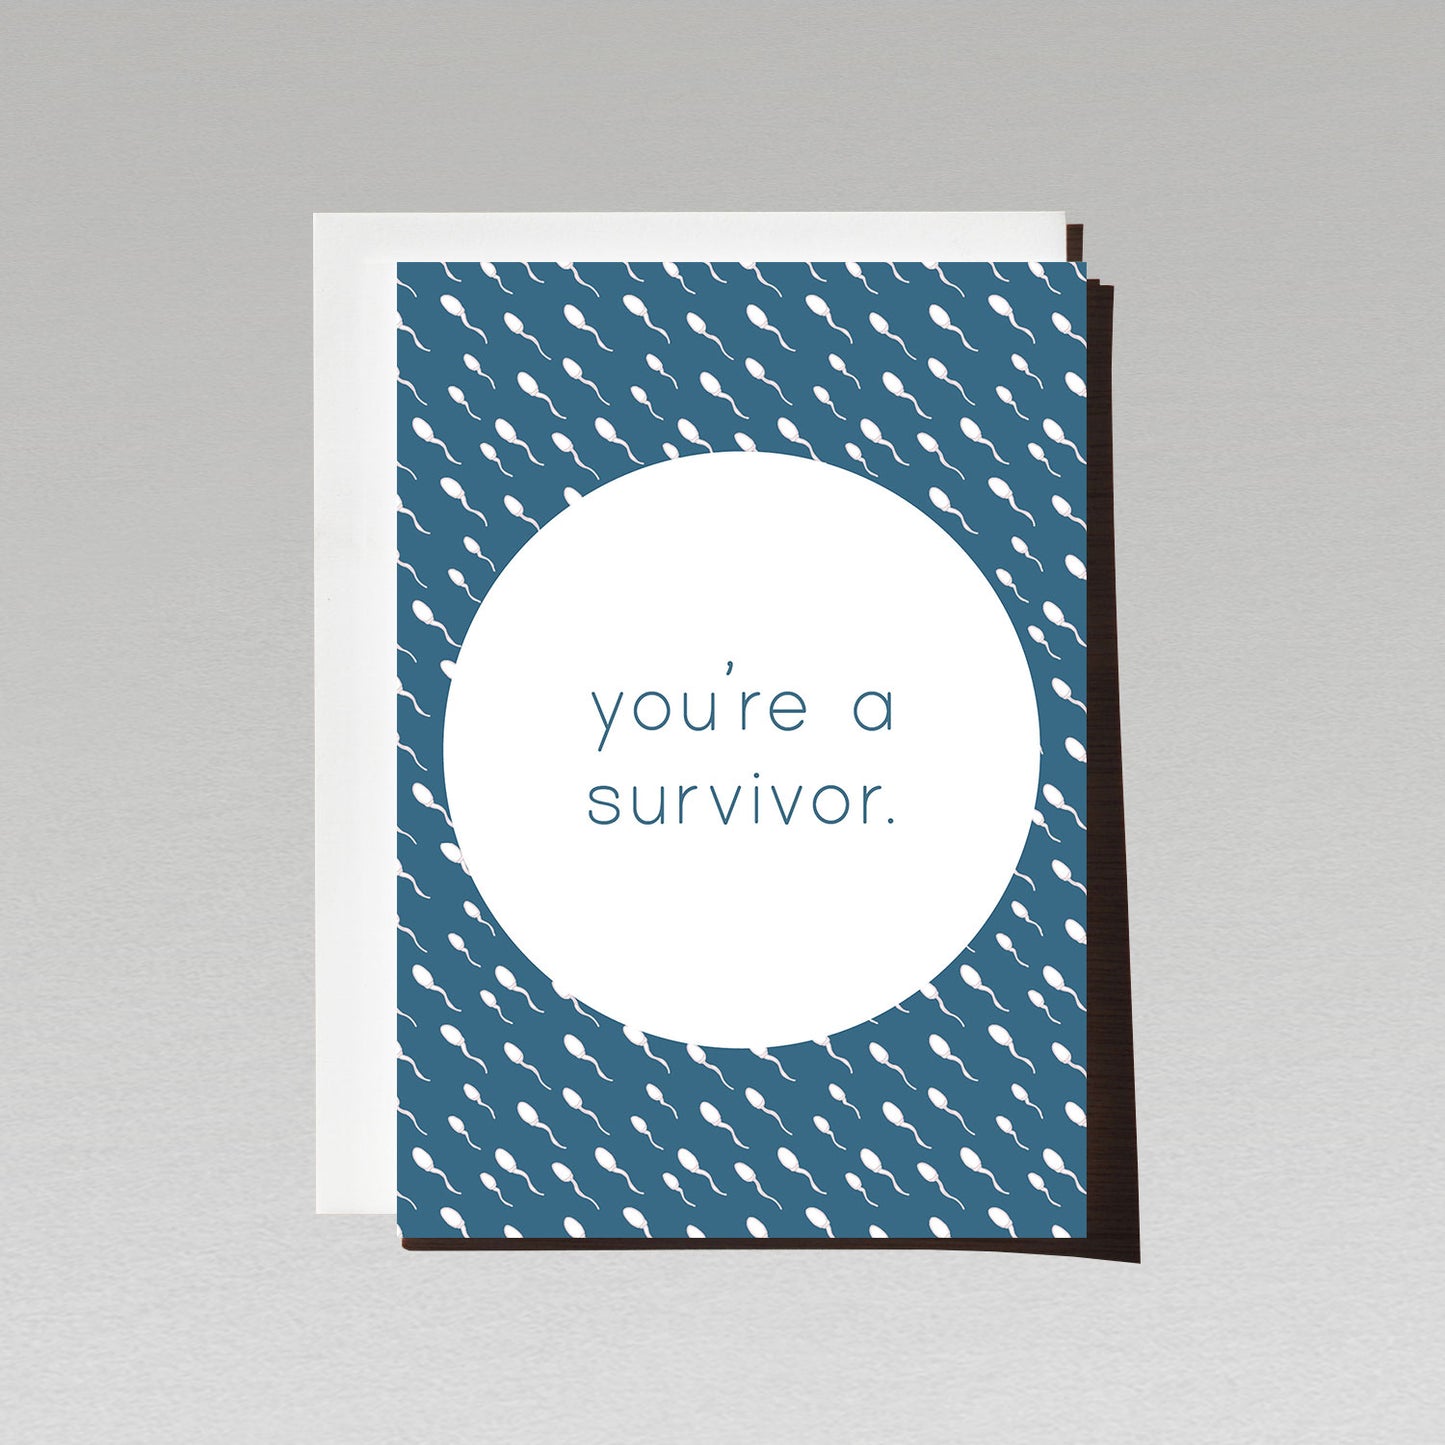 Blue backround greeting card filled with white sperm pattern with text You're a survivor